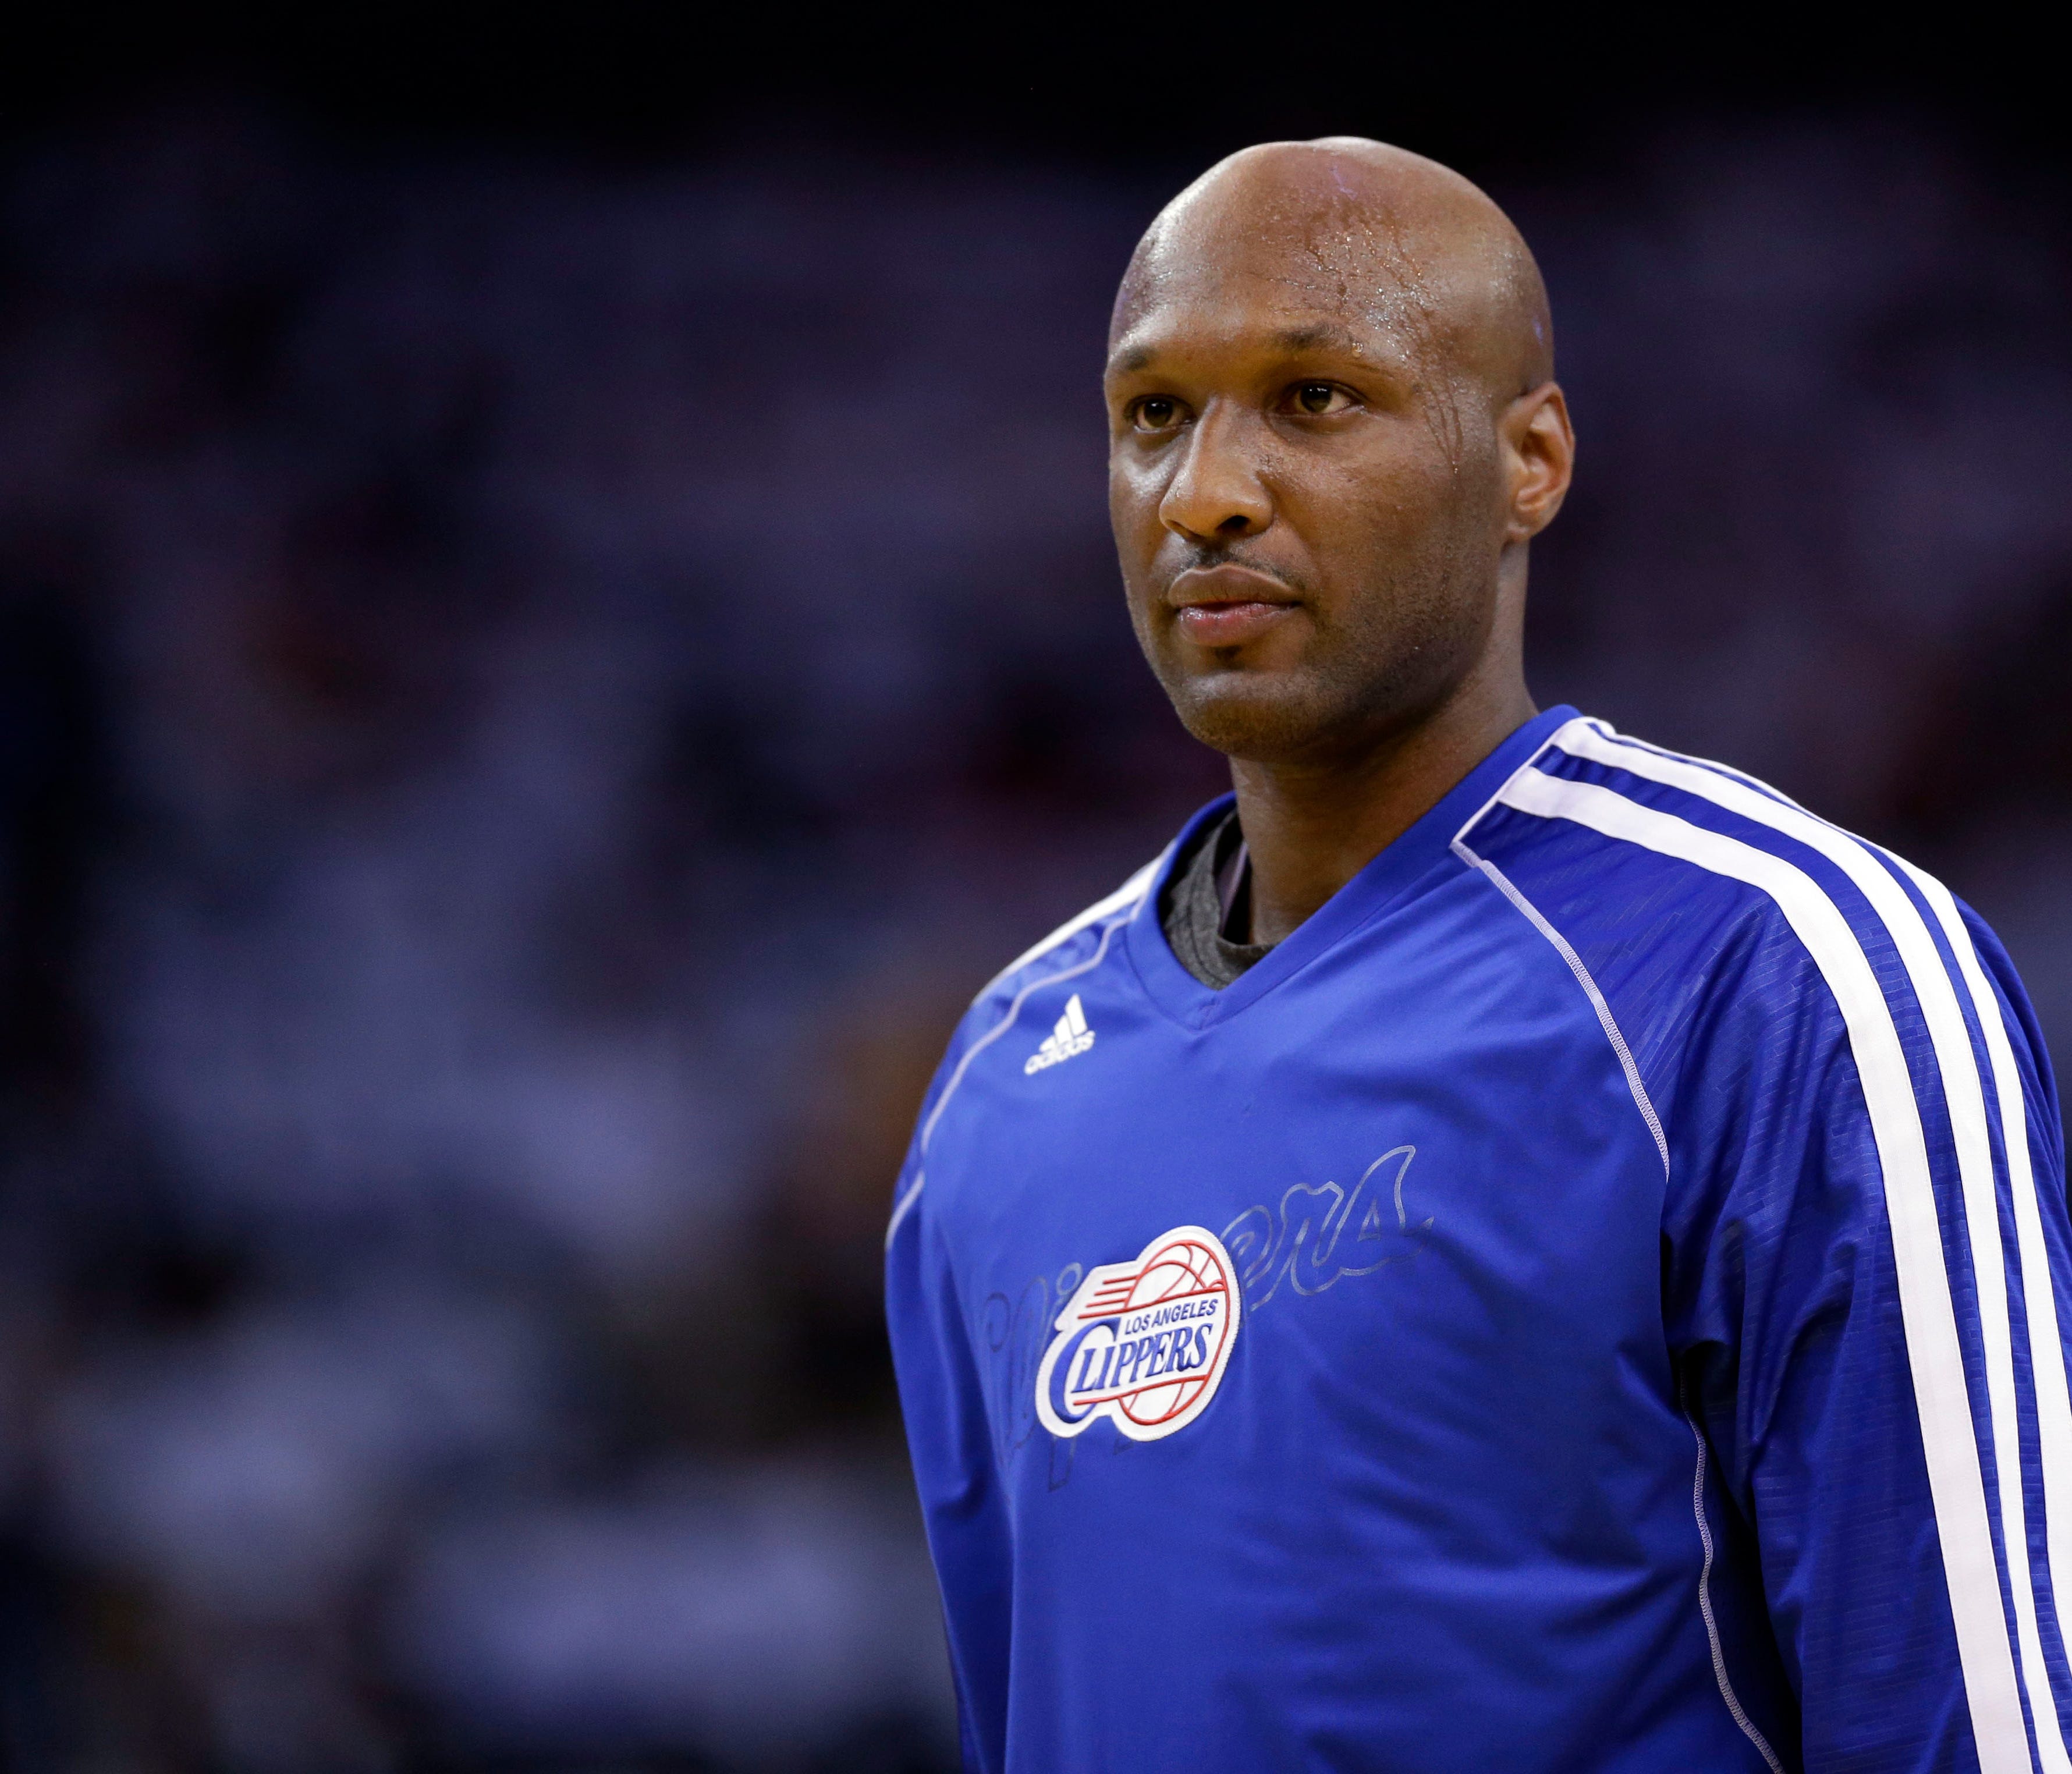 FILE - This Jan. 2, 2013, file photo shows Los Angeles Clippers' Lamar Odom during an NBA basketball game against the Golden State Warriors in Oakland, Calif.  (AP Photo/Marcio Jose Sanchez, File)